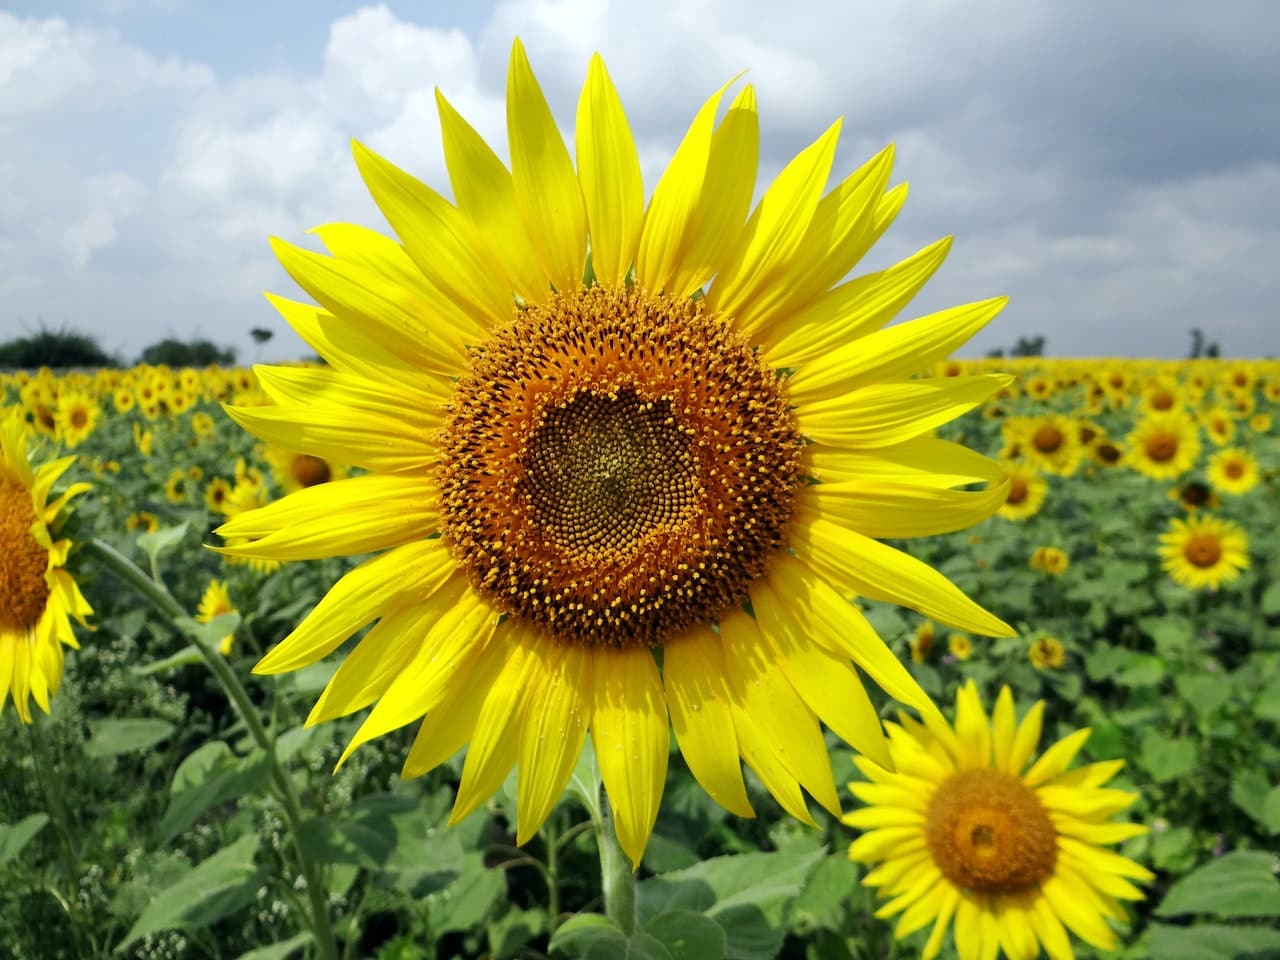 horizontal photo with a sunflower in focus in the foreground and an out of focus sunflower field in the background